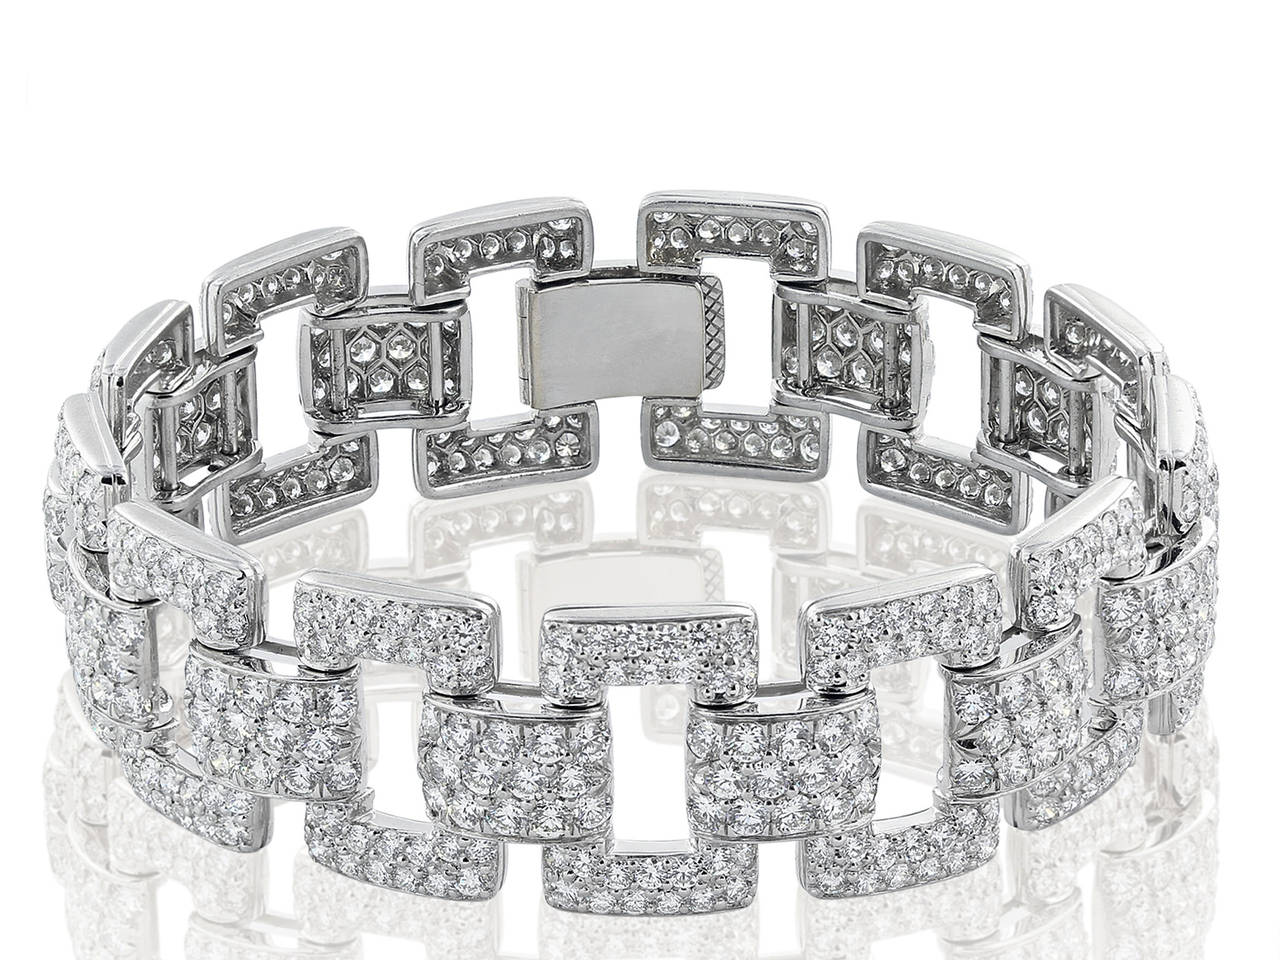 Platinum flexible rectangular and bar link bracelet consisting of 522 pave set round brilliant cut diamonds having a total weight of 15.13 carats and an average approximate color and clarity of G/VS2.